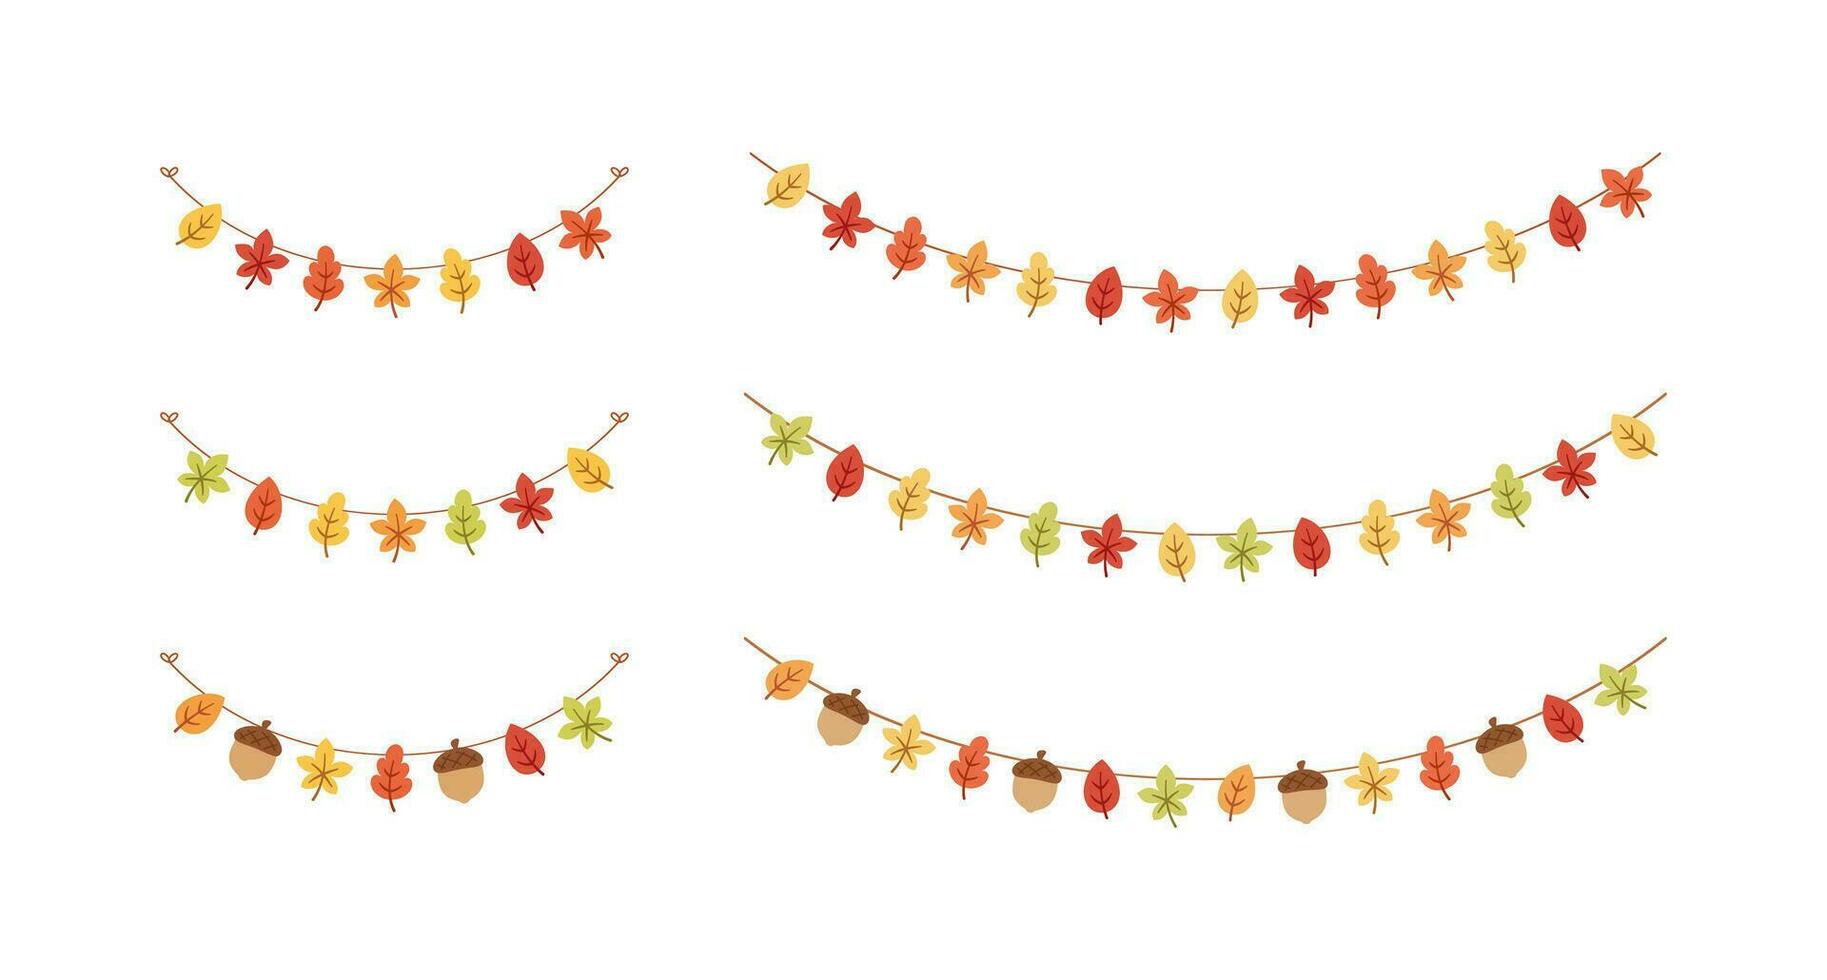 Autumn leaves garland in orange and red colors for Fall and Thanksgiving season set. Vector isolated on white background.